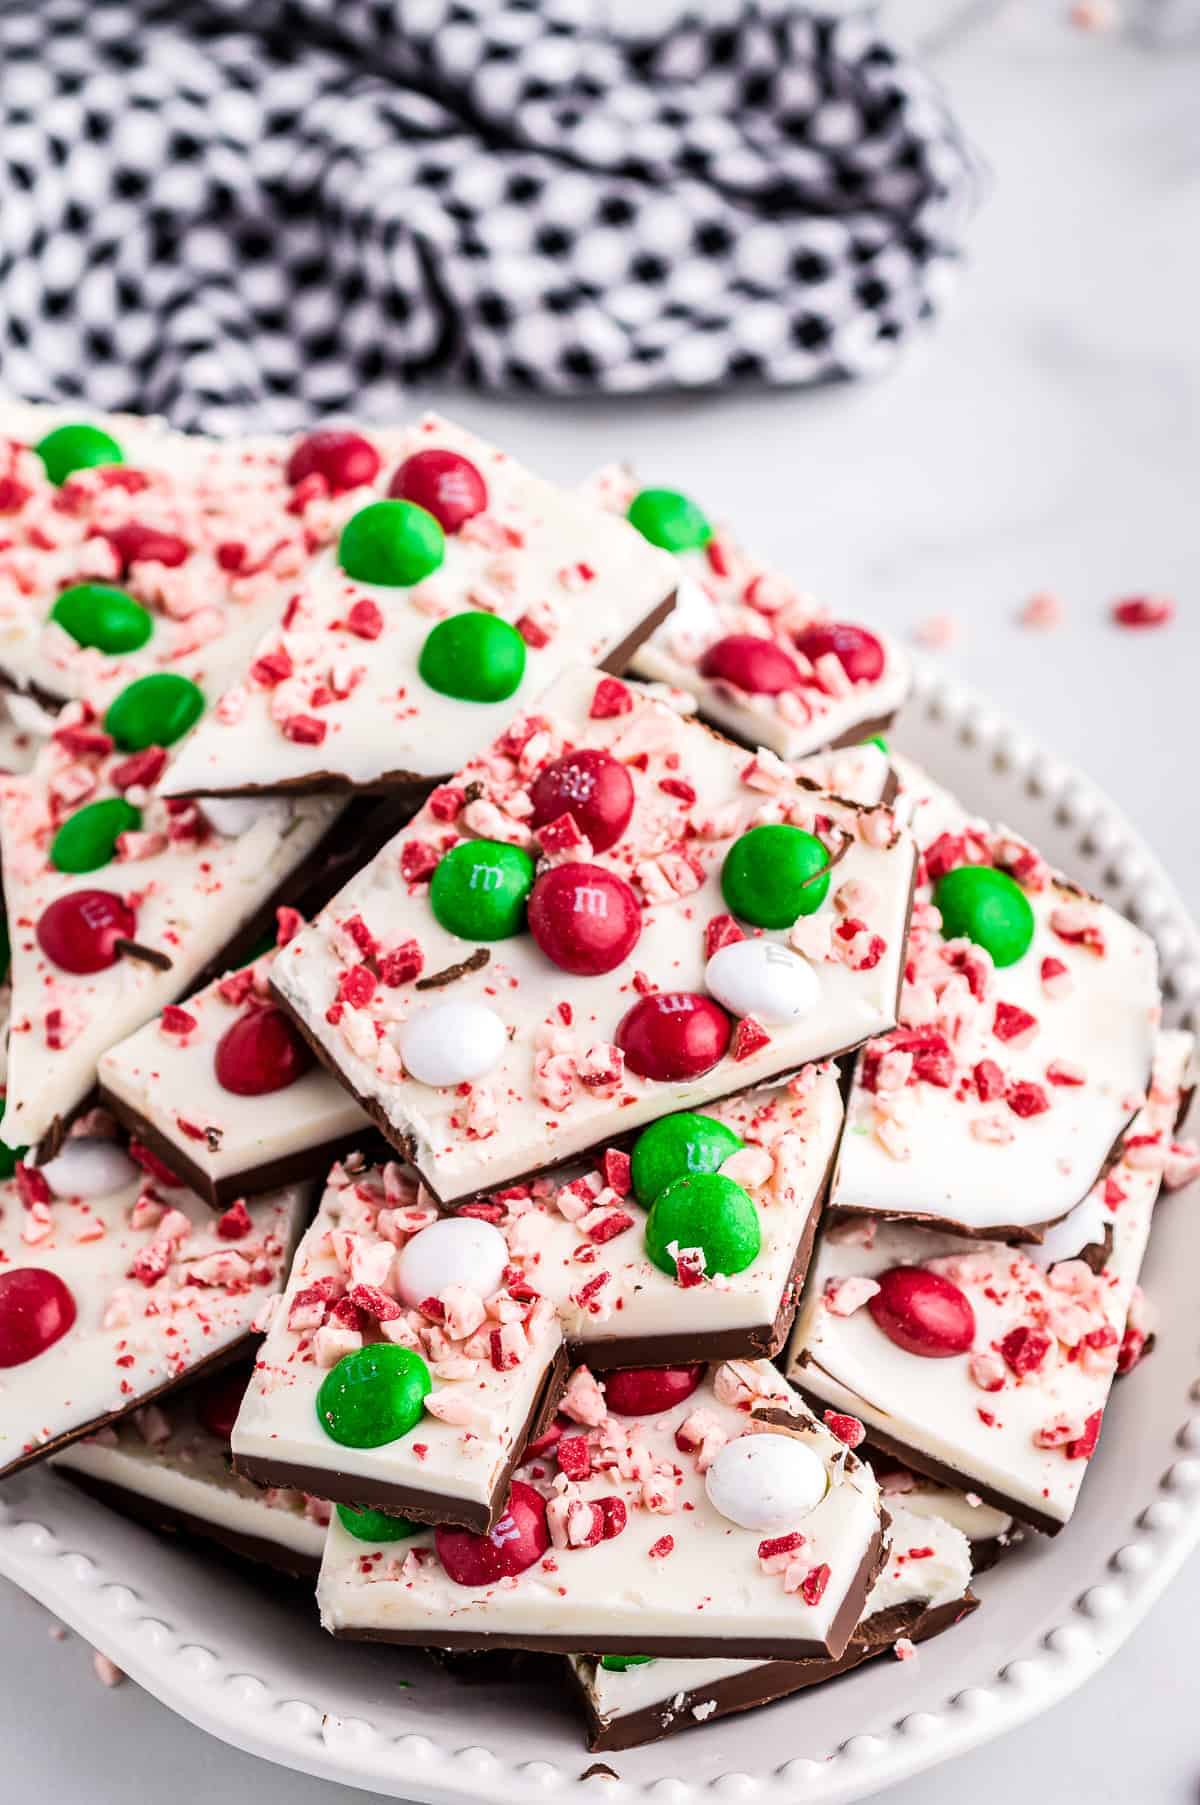 Pieces of peppermint bark on plate with navy check napkin in background